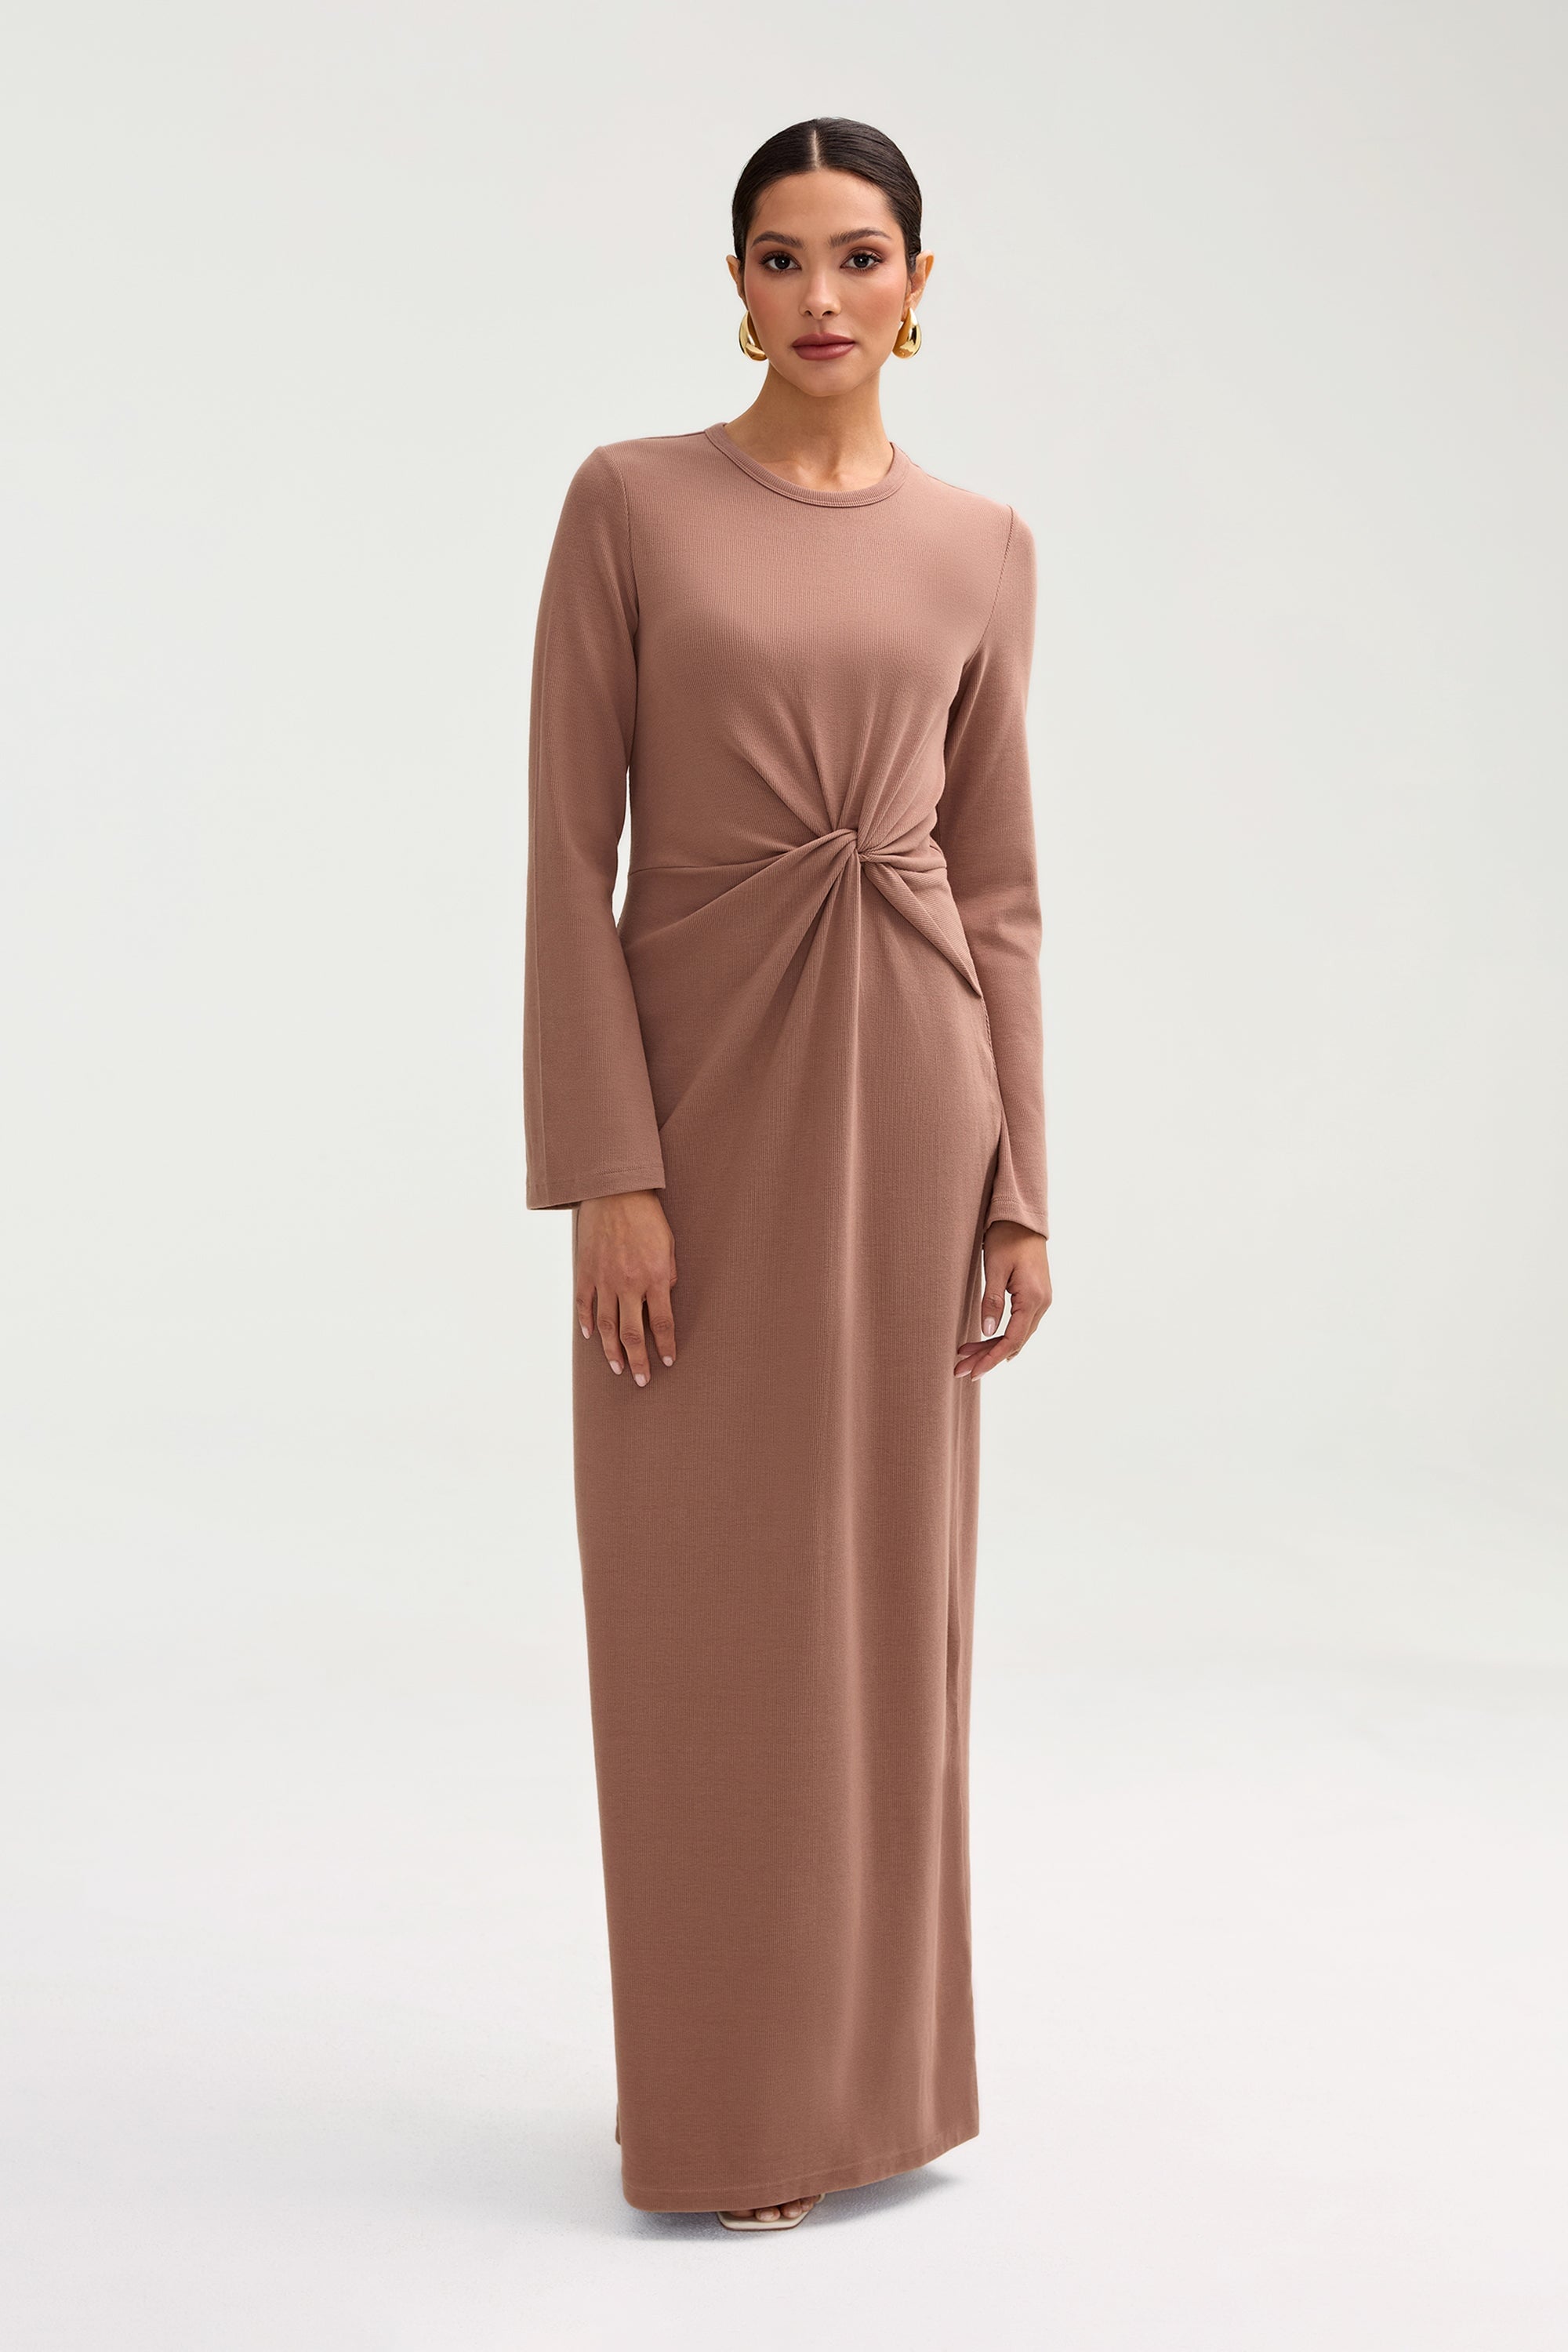 Aissia Ribbed Twist Front Maxi Dress - Brownie Clothing epschoolboard 